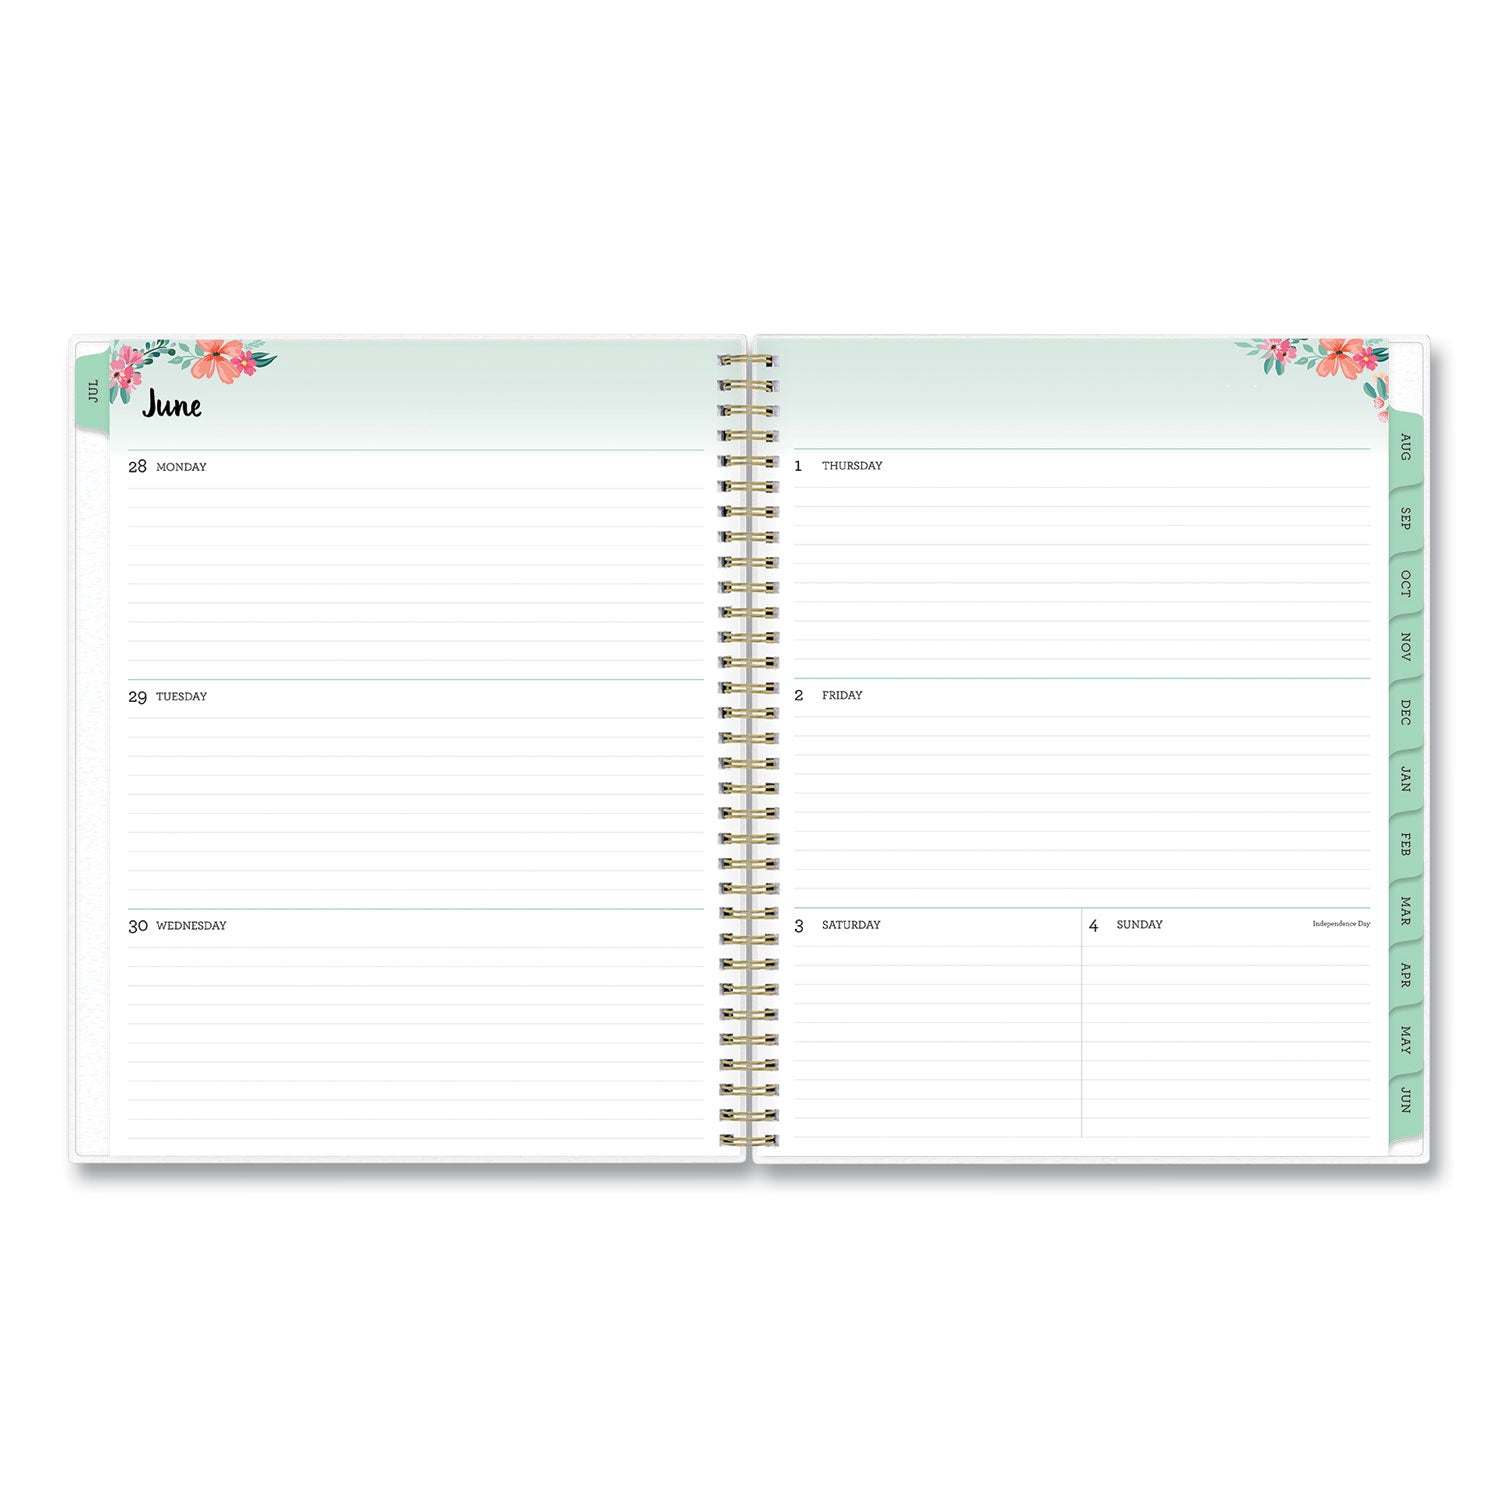 laurel-academic-year-weekly-monthly-planner-floral-artwork-11-x-85-green-pink-cover-12-month-july-june-2021-2022_bls131947 - 2